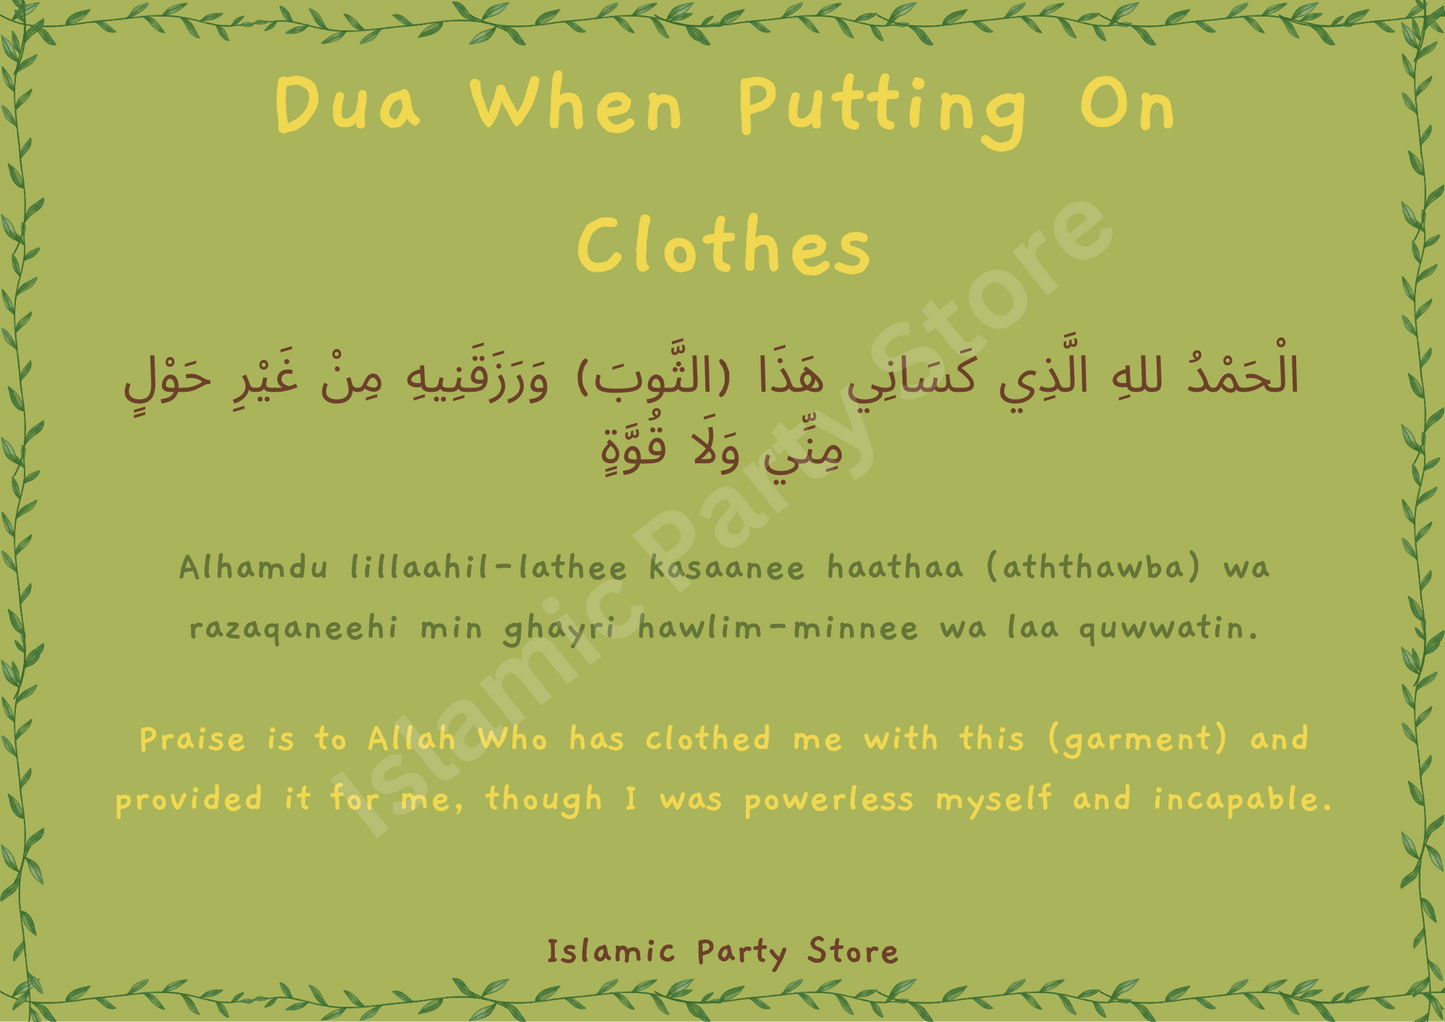 Putting on clothes dua